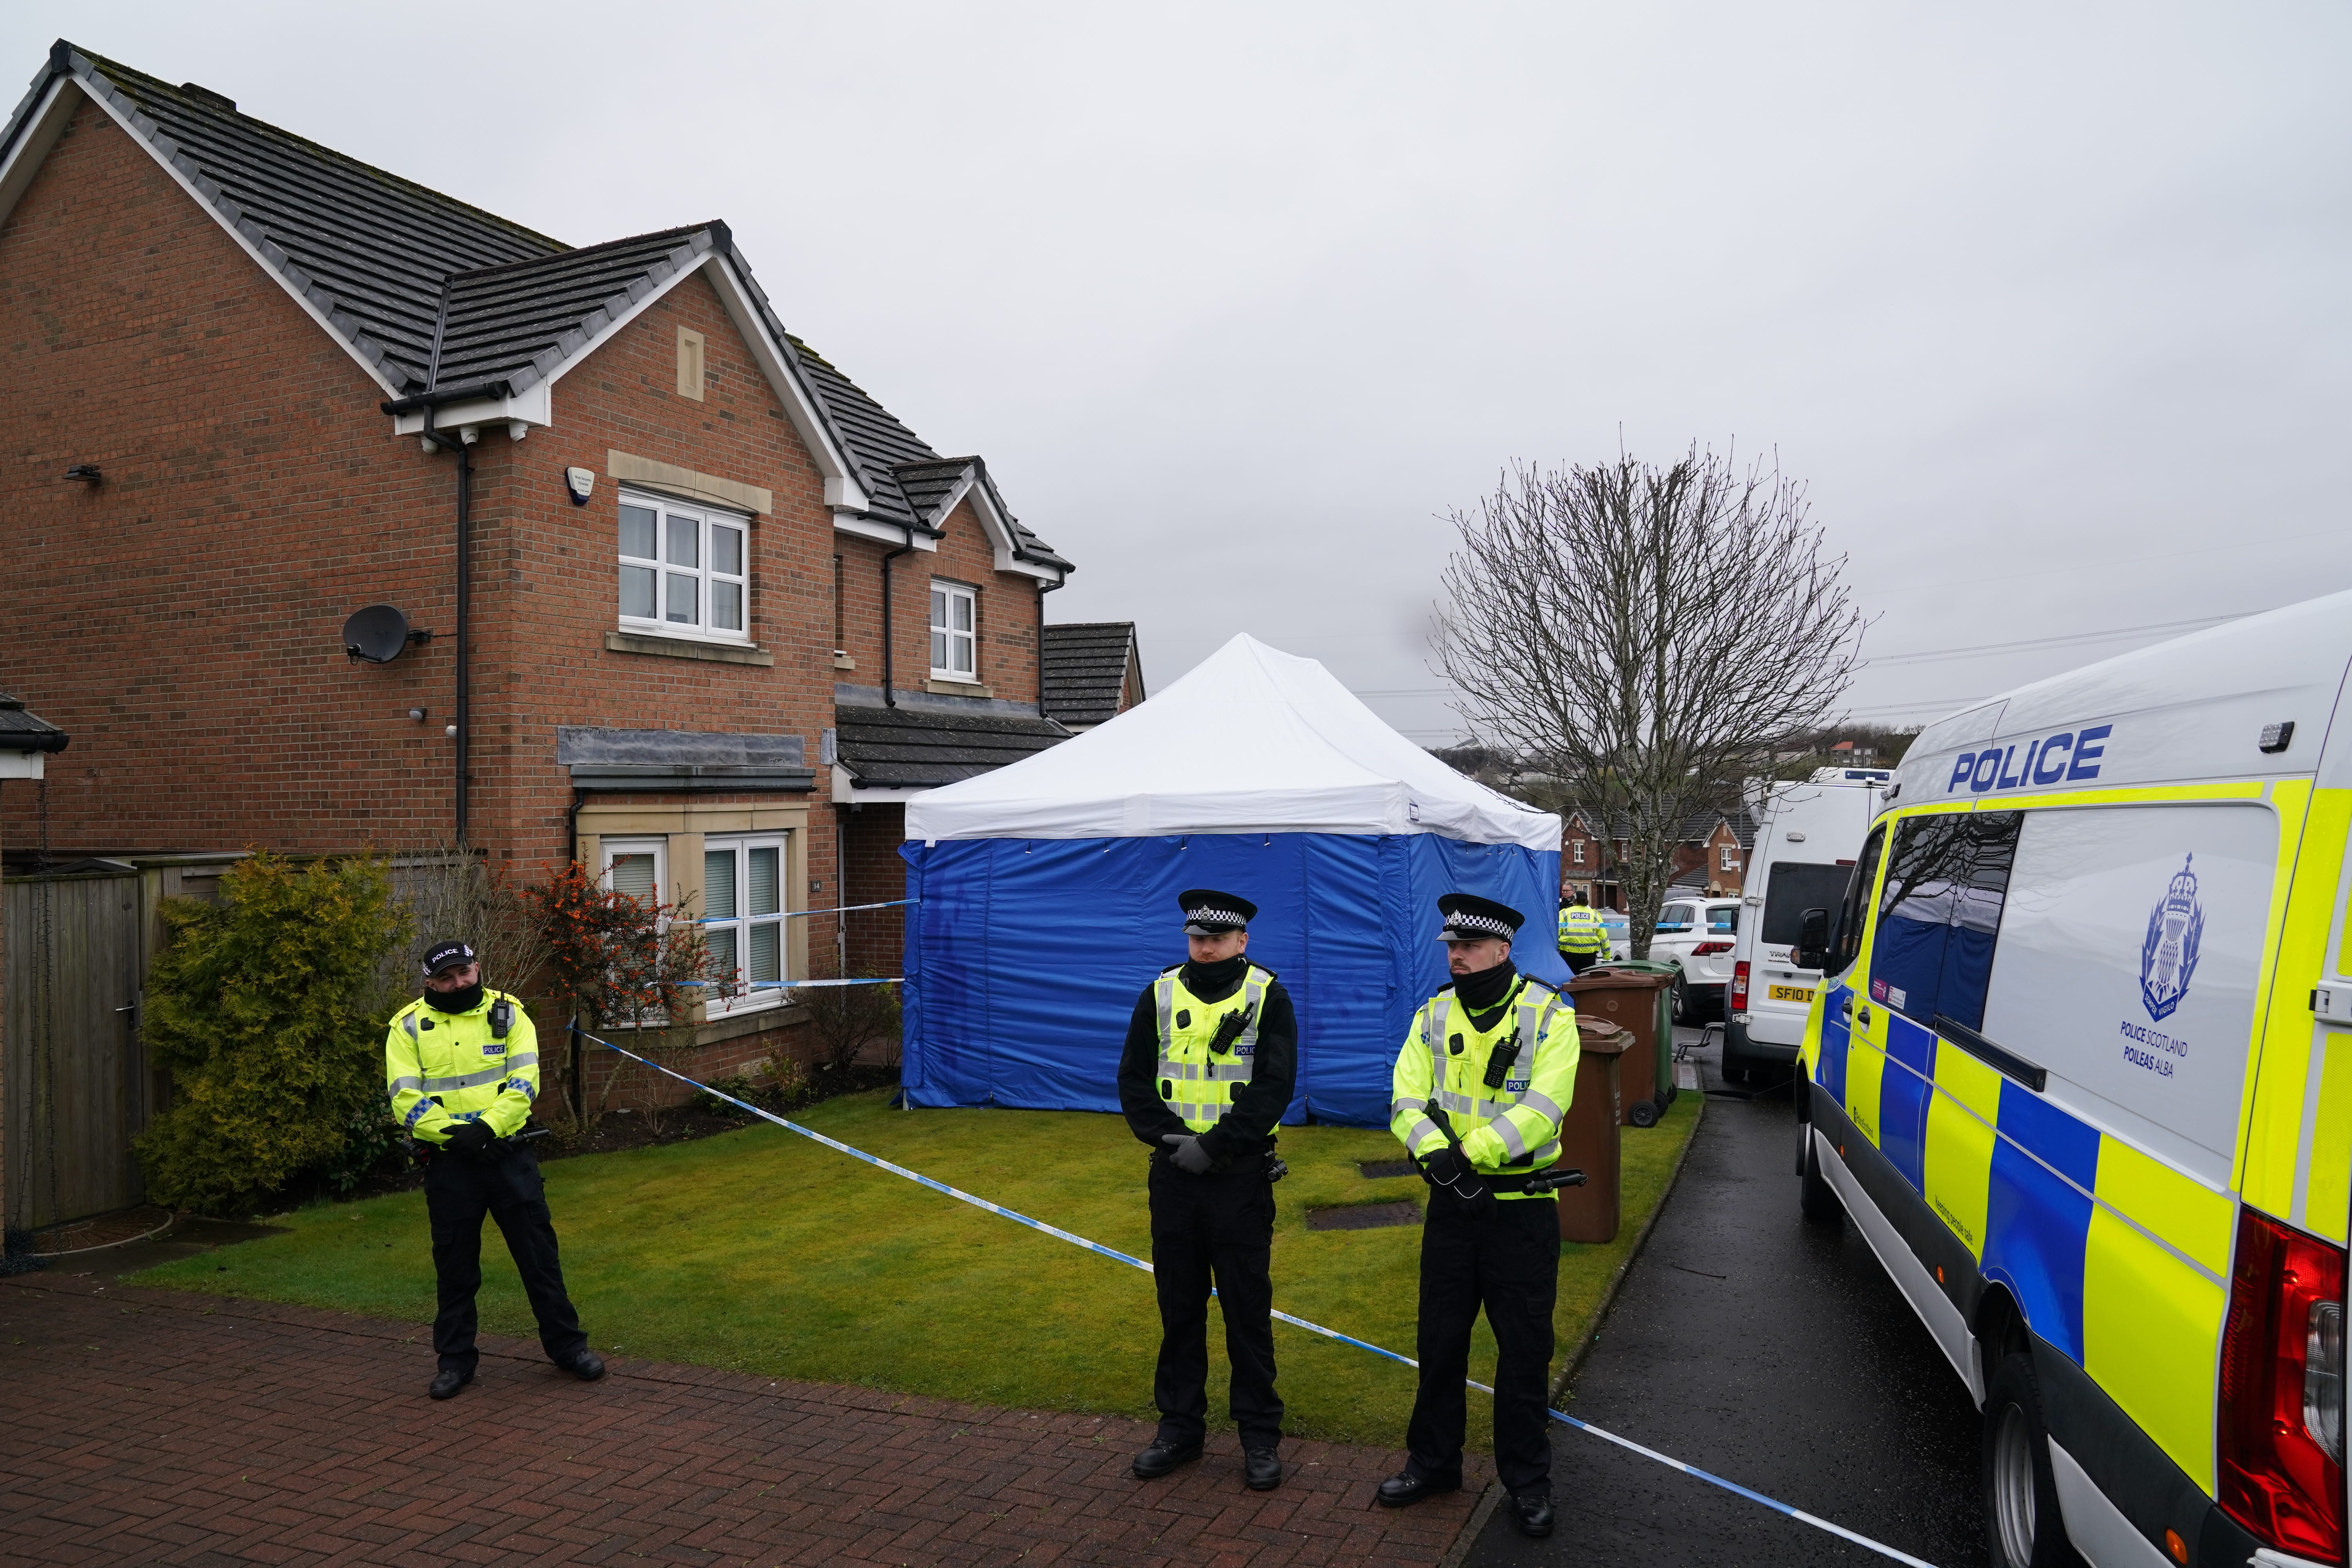 The home of Mr Murrell and Ms Sturgeon has been raided as part of an ongoing investigation